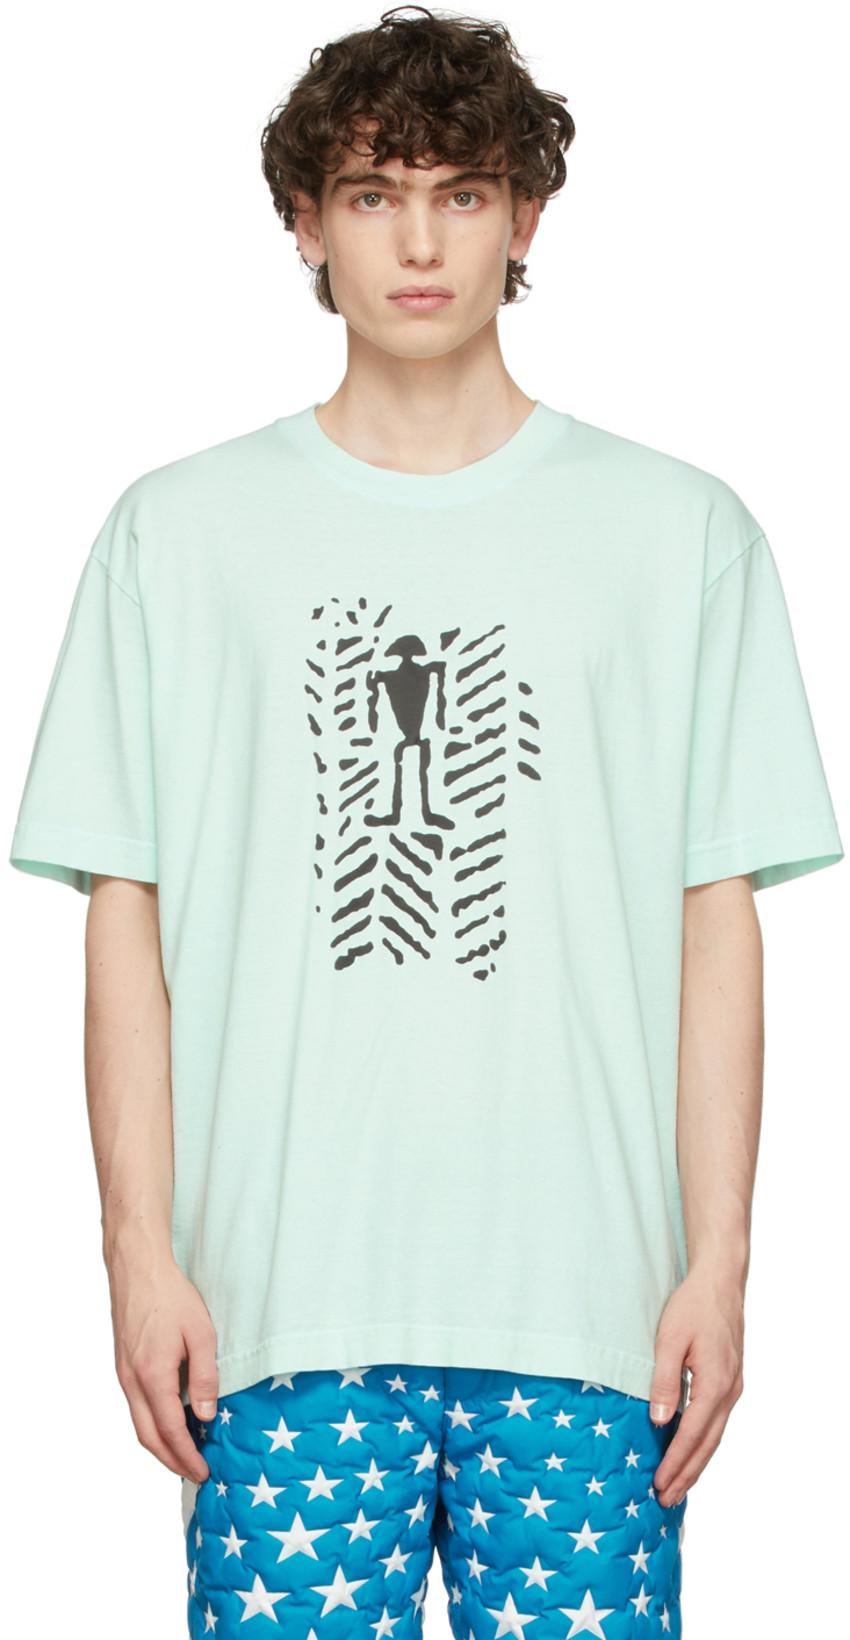 SSENSE Exclusive Ancient Man T-Shirt by COME BACK AS A FLOWER